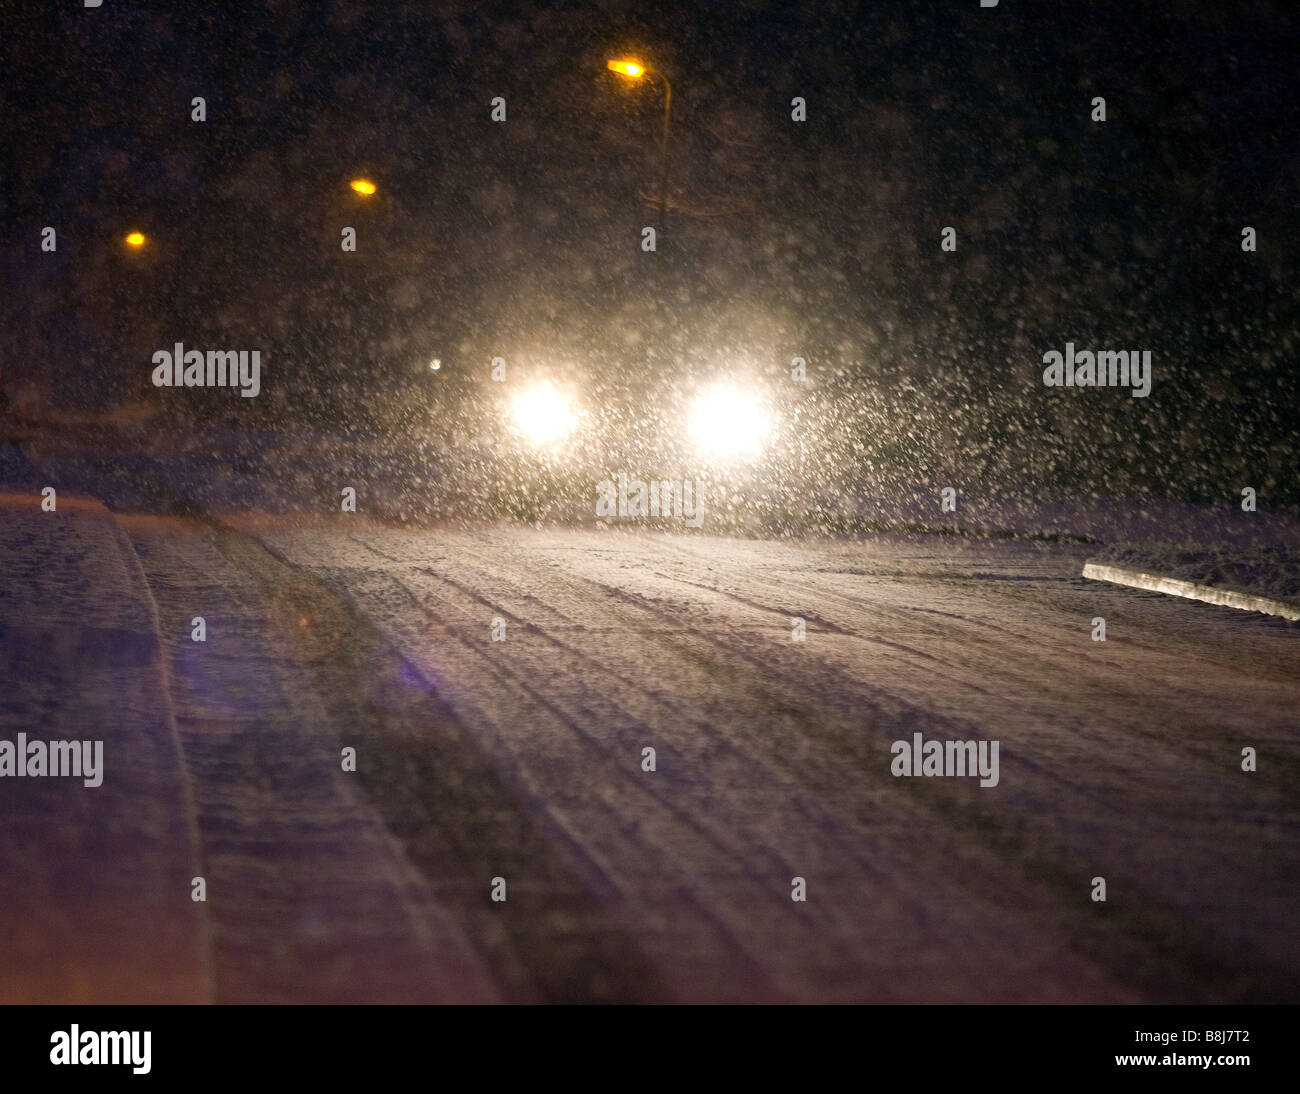 A car's headlights at night as it drives through a snow storm in Redditch, Worcestershire, UK Stock Photo